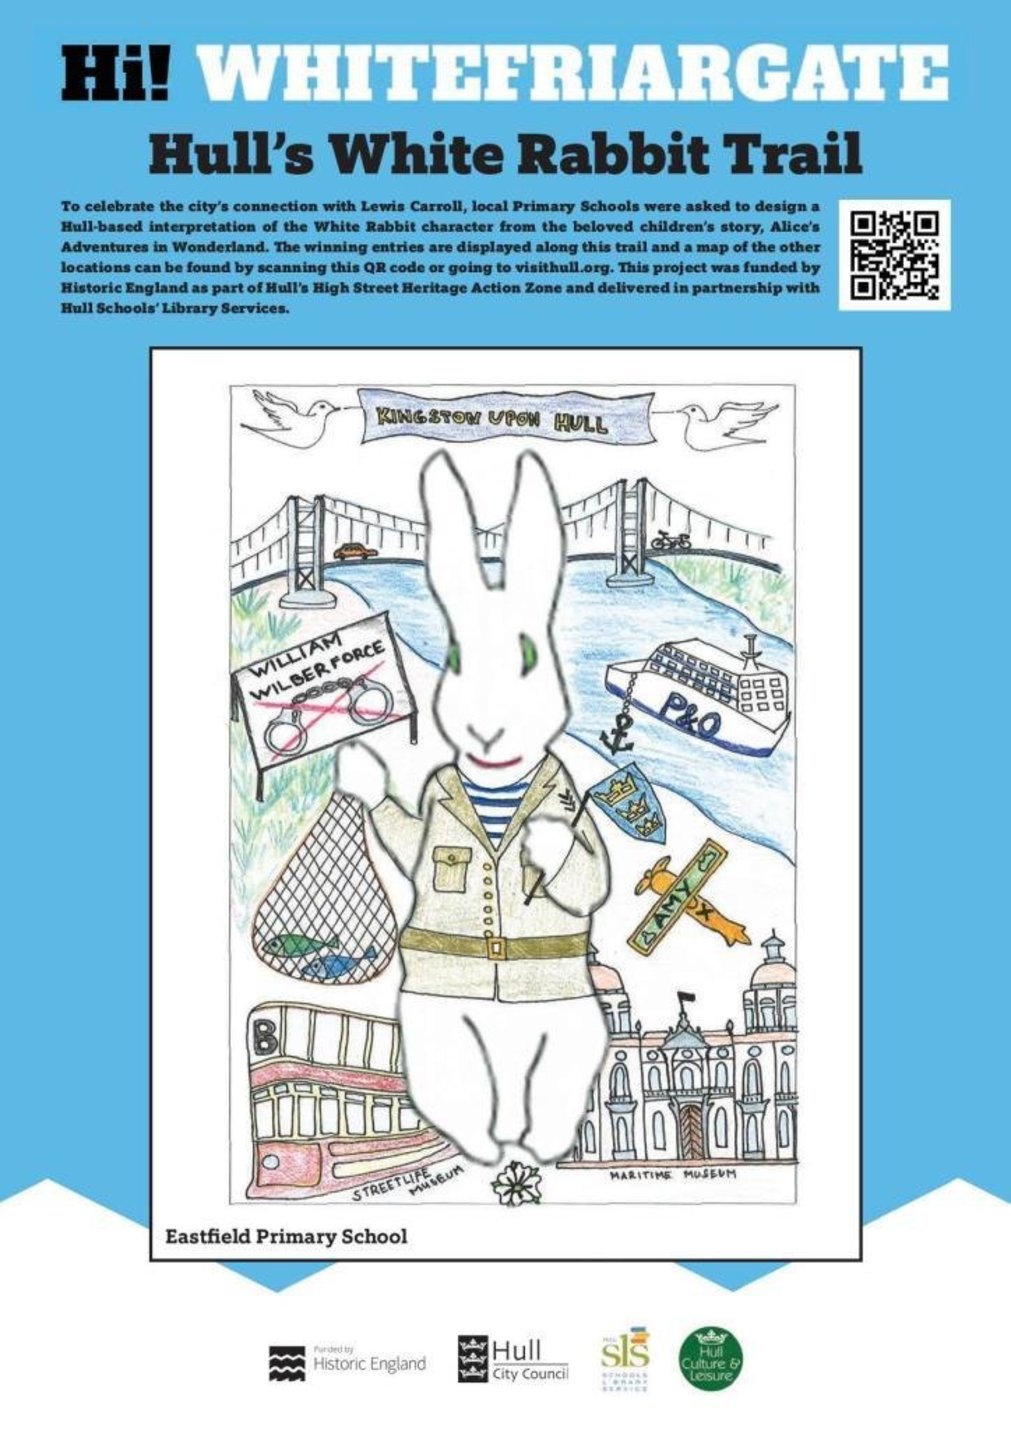 Follow the White Rabbit through Hull's old town in family trail